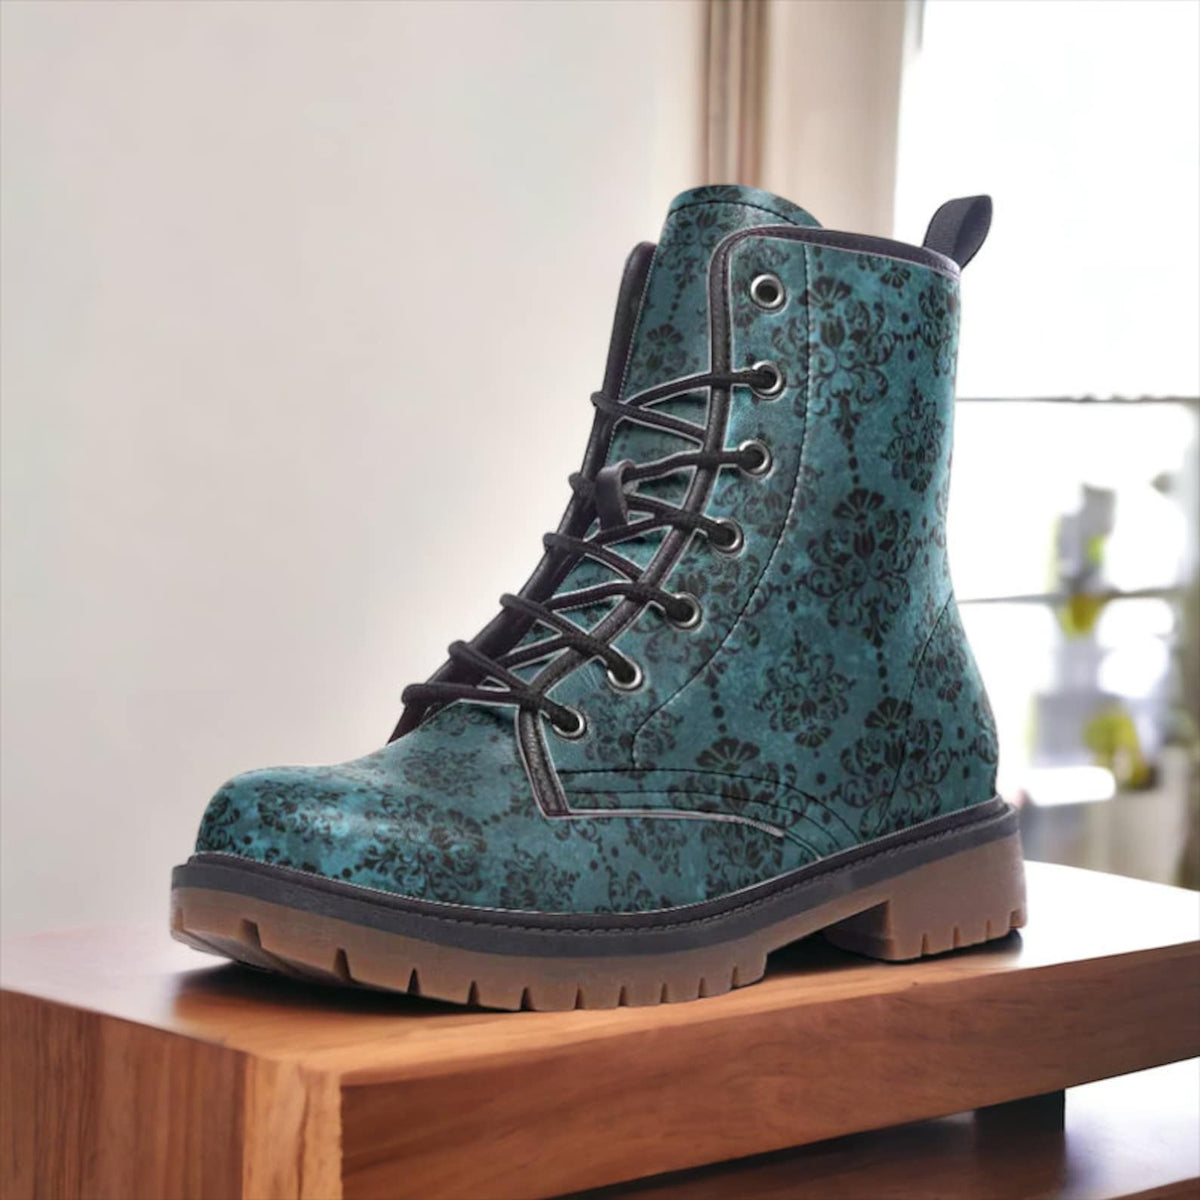 Emerald Blossoms - Boho Witchy Boots, Dark Romantic Boots